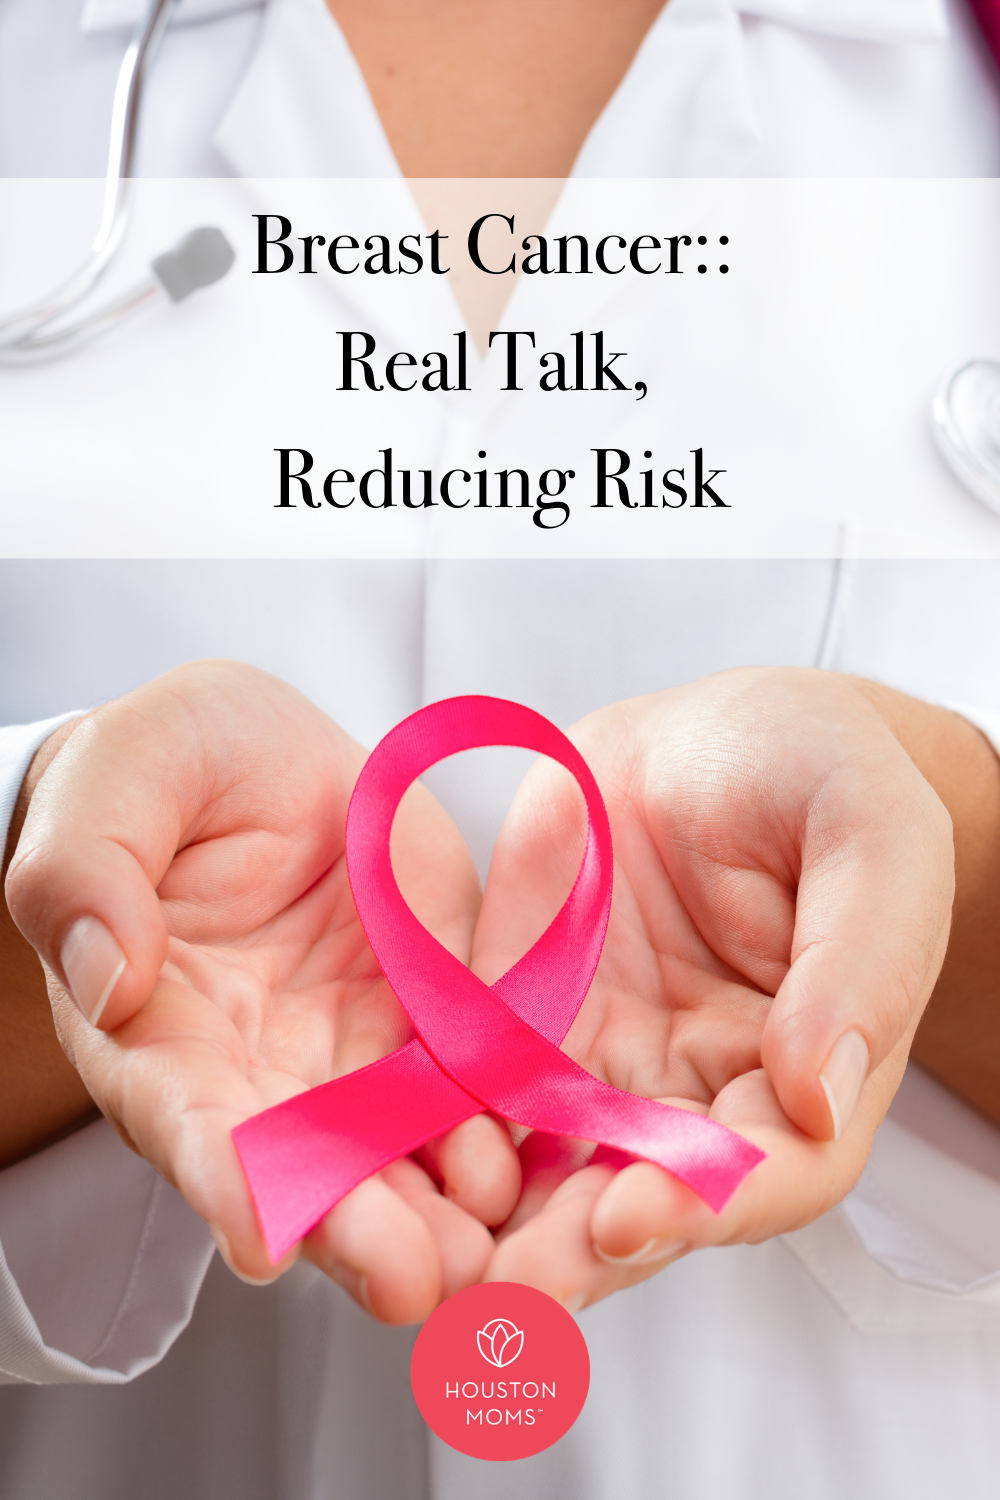 Houston Moms "Breast Cancer:: Real Talk, Reducing Risk" #houstonmoms #houstonmomsblog #momsaroundhouston